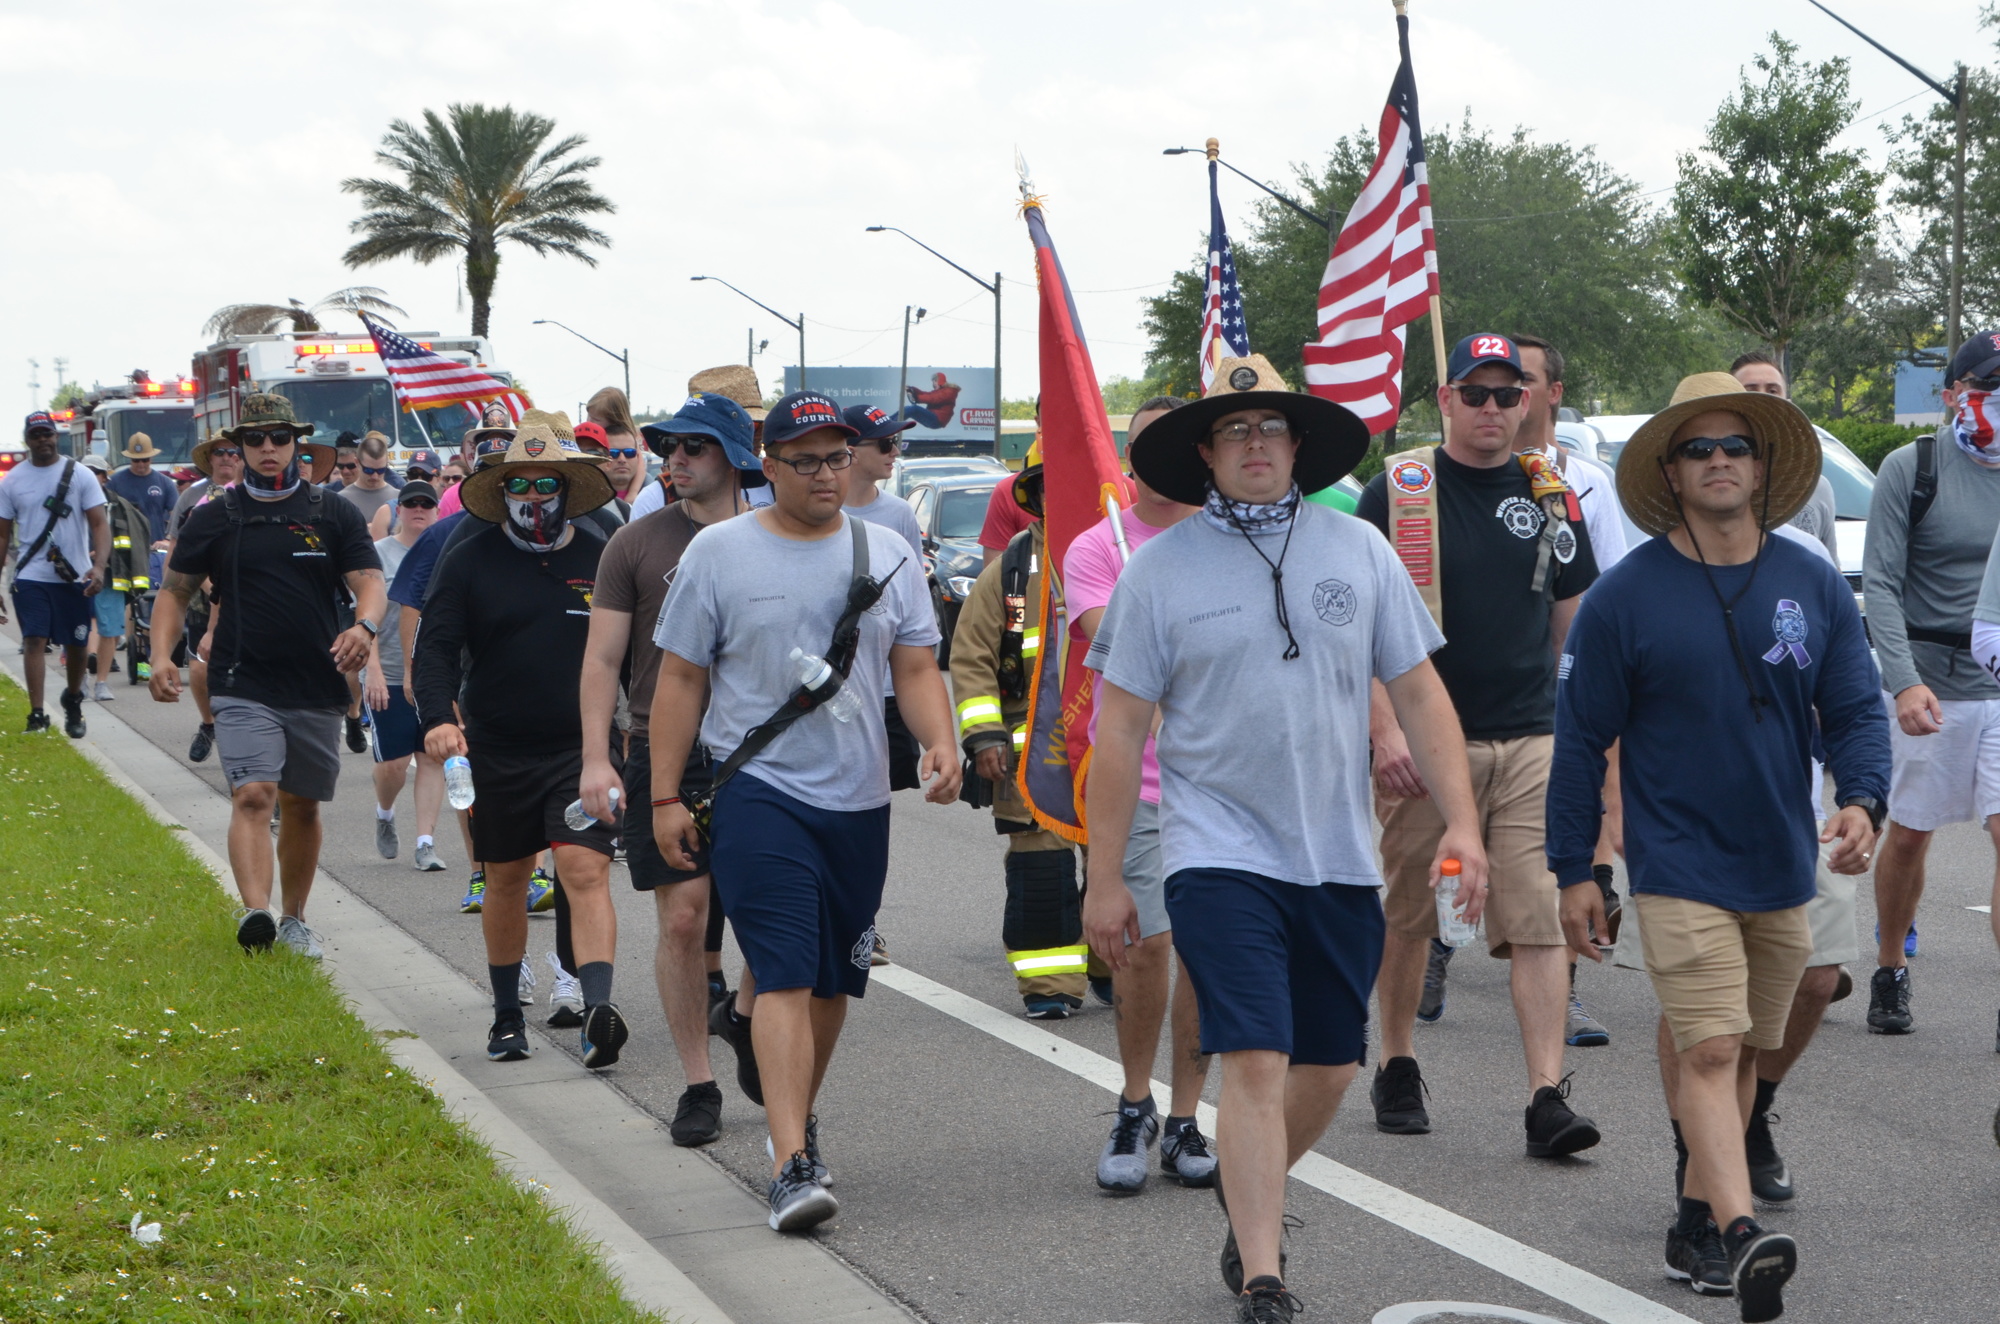 First responders, families of first responders and concerned citizens have committed to walking portions of Tom “Bull” Hill’s route from Key West to Tallahassee.